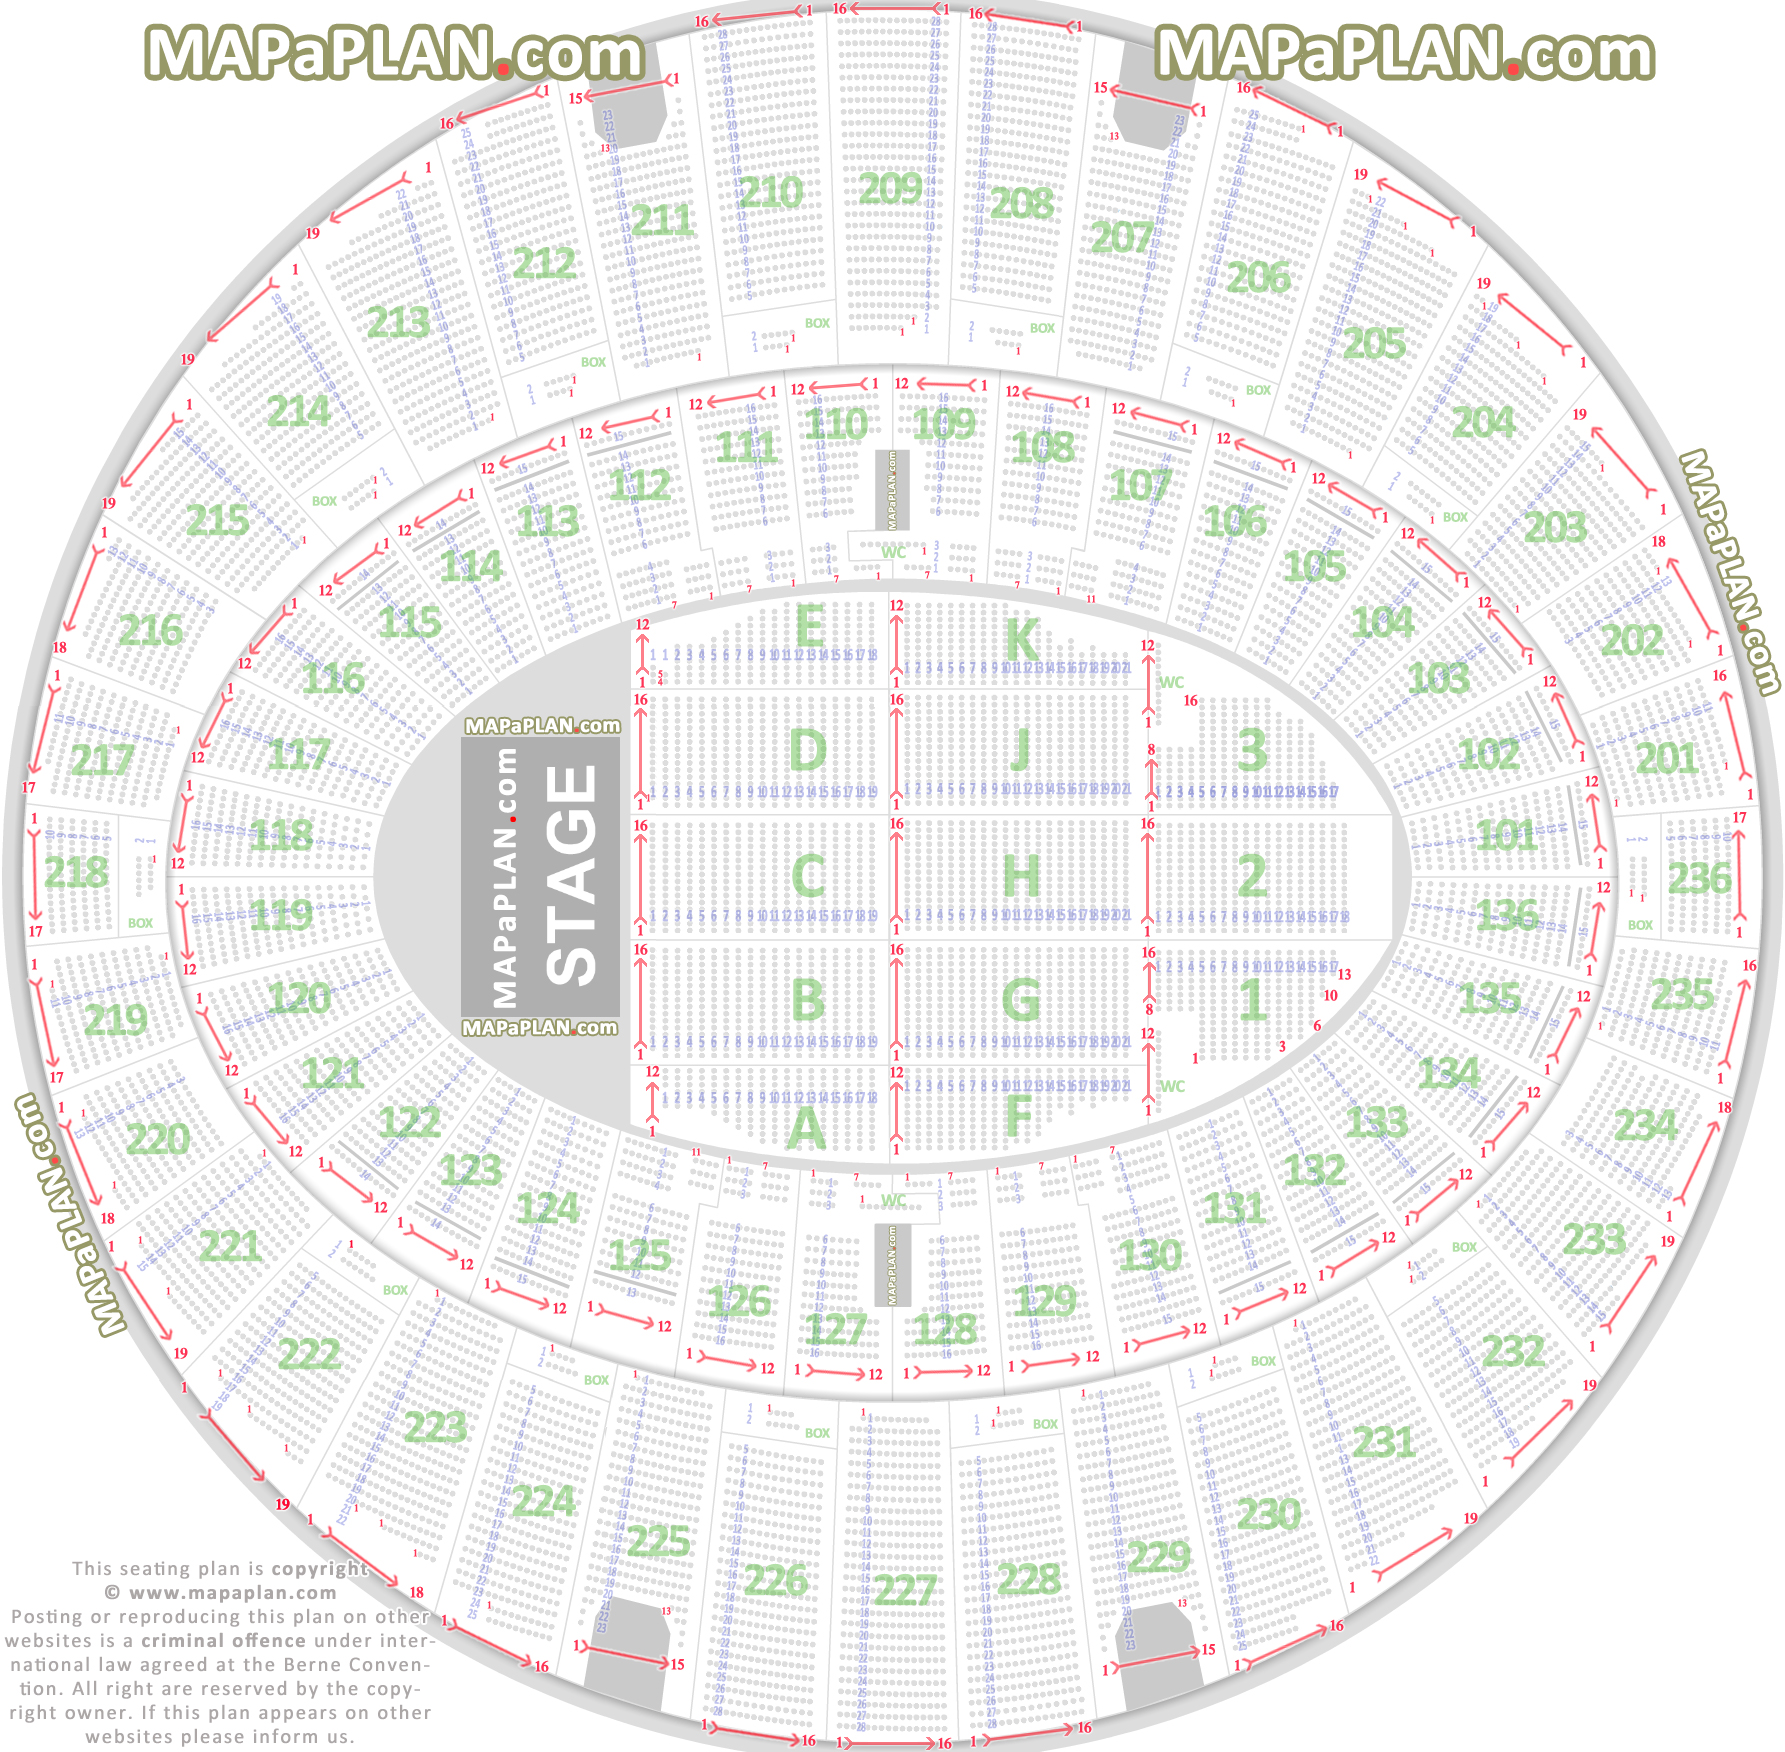 Detailed seat numbers chart with rows sections layout The Kia Forum Inglewood Inglewood seating chart